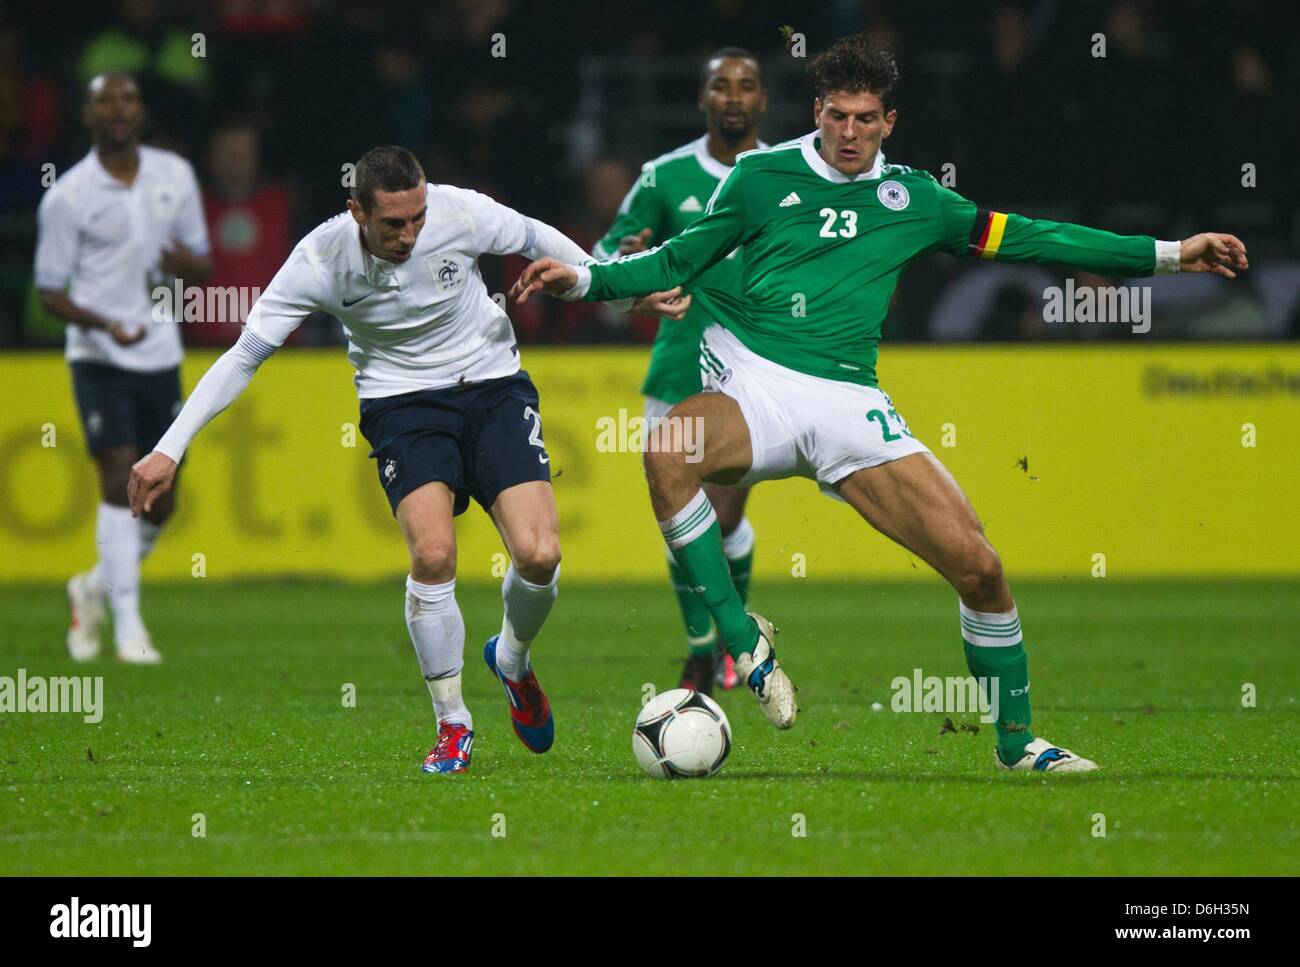 Germany's Mario Gomez (r) and Morgan Amalfitano of France fight for the ball during the international friendly soccer match Germany vs France at the Weser stadium in Bremen, Germany, 29 February 2012. Photo: Jens Wolf dpa/lni  +++(c) dpa - Bildfunk+++ Stock Photo